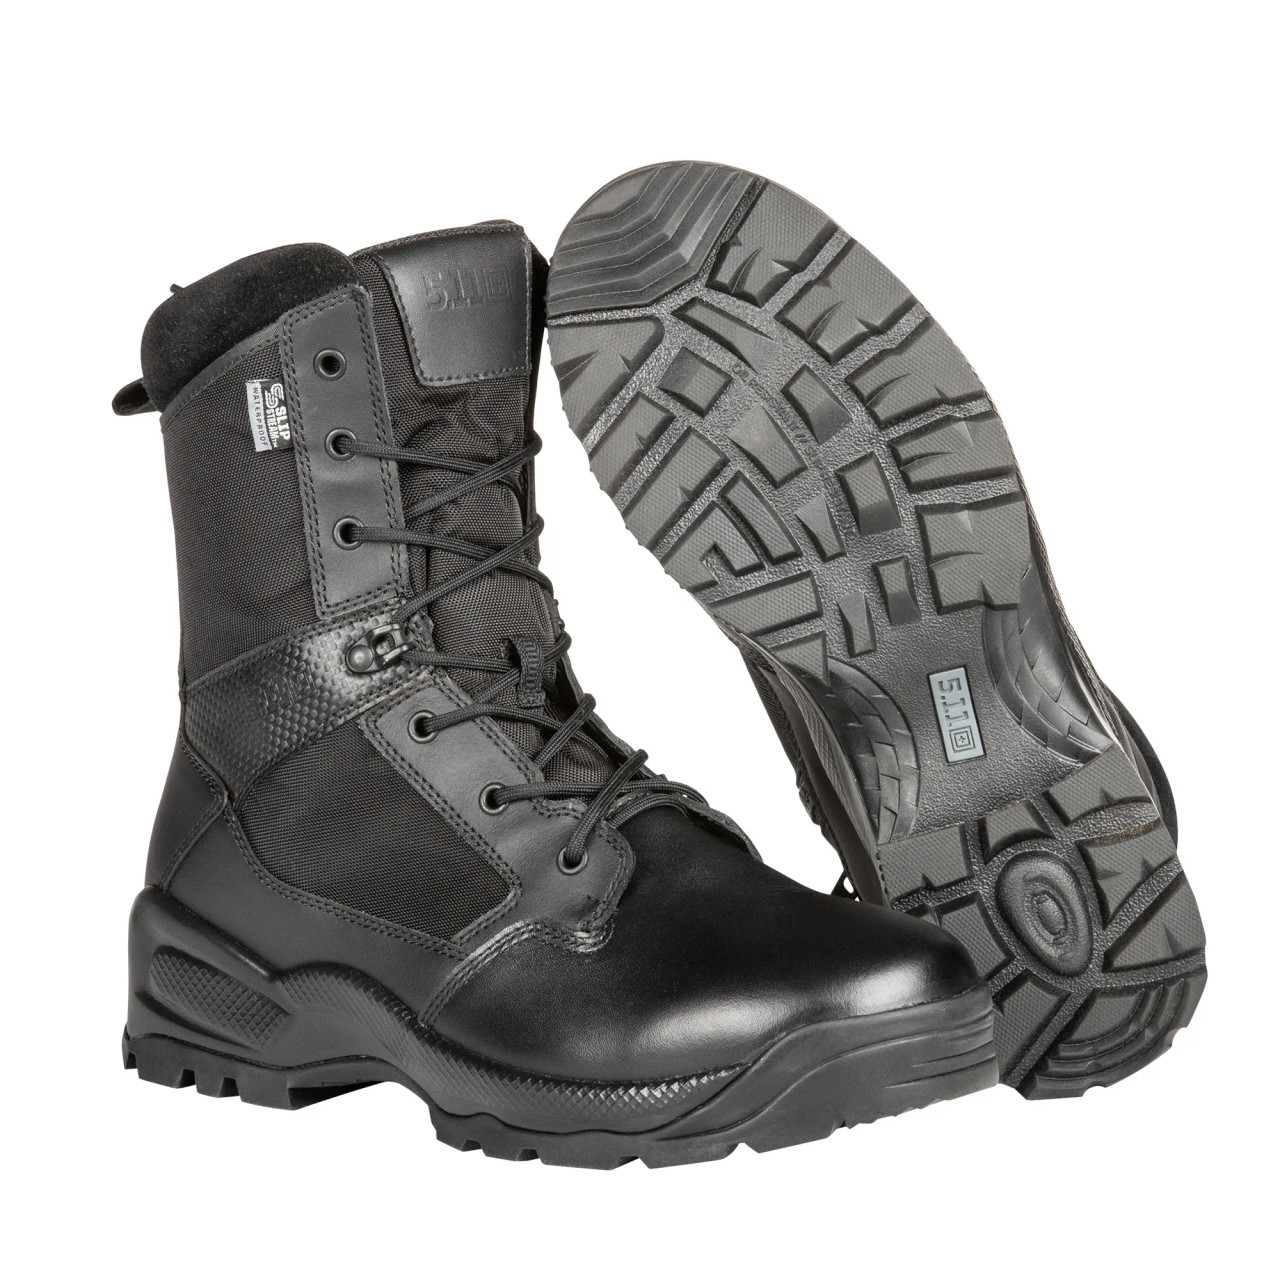 5.11 Tactical Women's A.T.A.C. 2.0 8 Boot with Side Zip Black